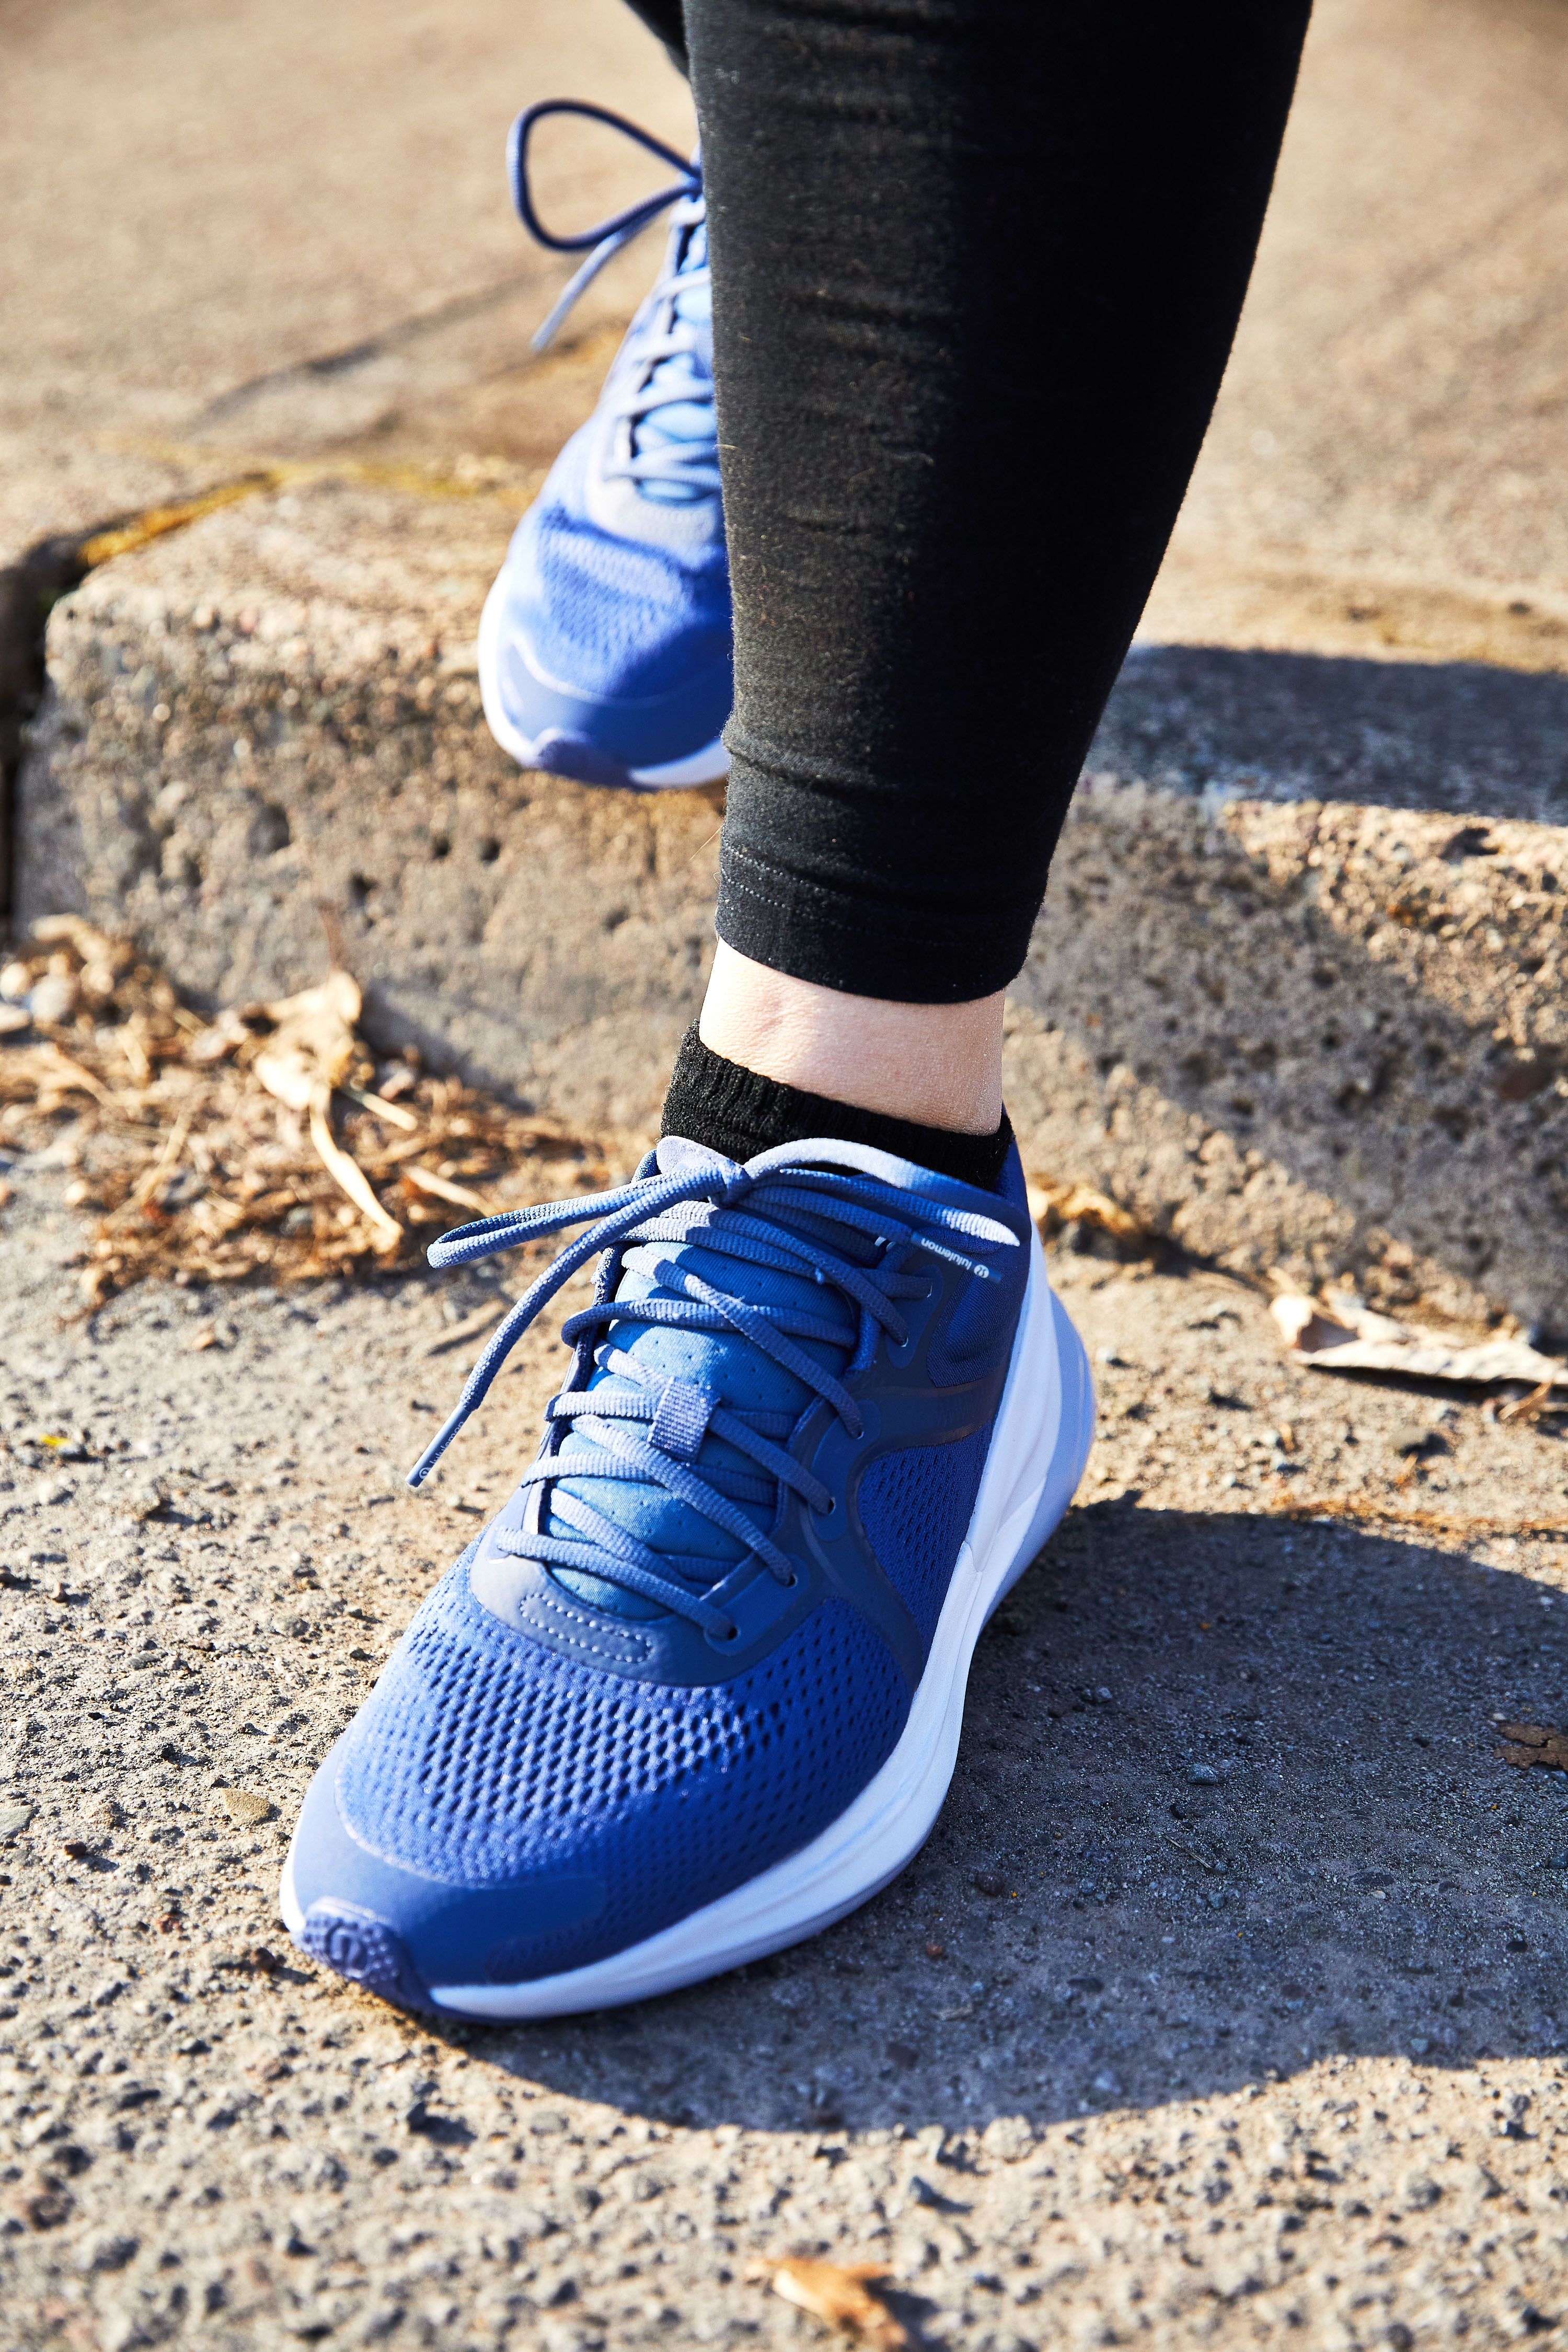 Lululemon launched its Blissfeel Trail Running Shoe — we tried it